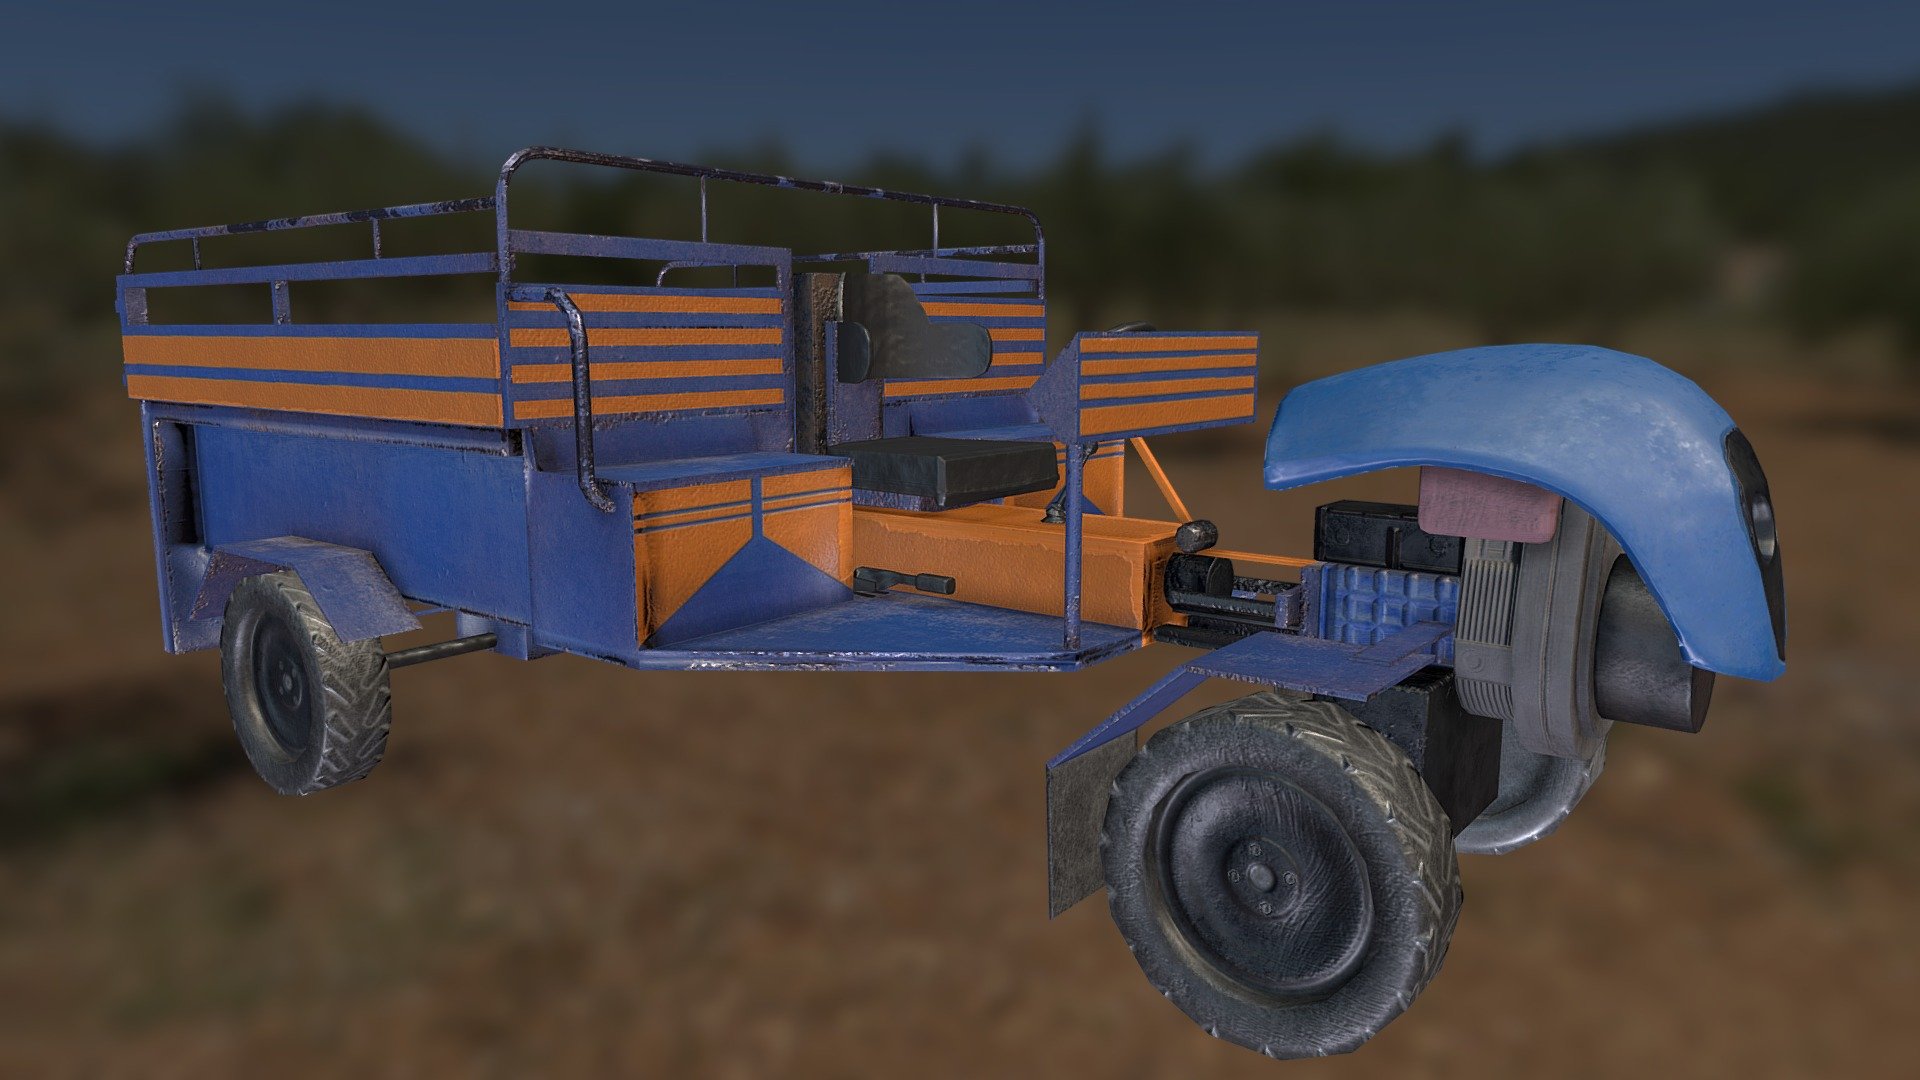 Low poly vehicle mostly used in villages for agricultural usage.
Made for art test of a company in 5 days. Triangle: 7500. Limits are 2k diffuse and normal texture. But I uploaded 4k pbr texture 3d model